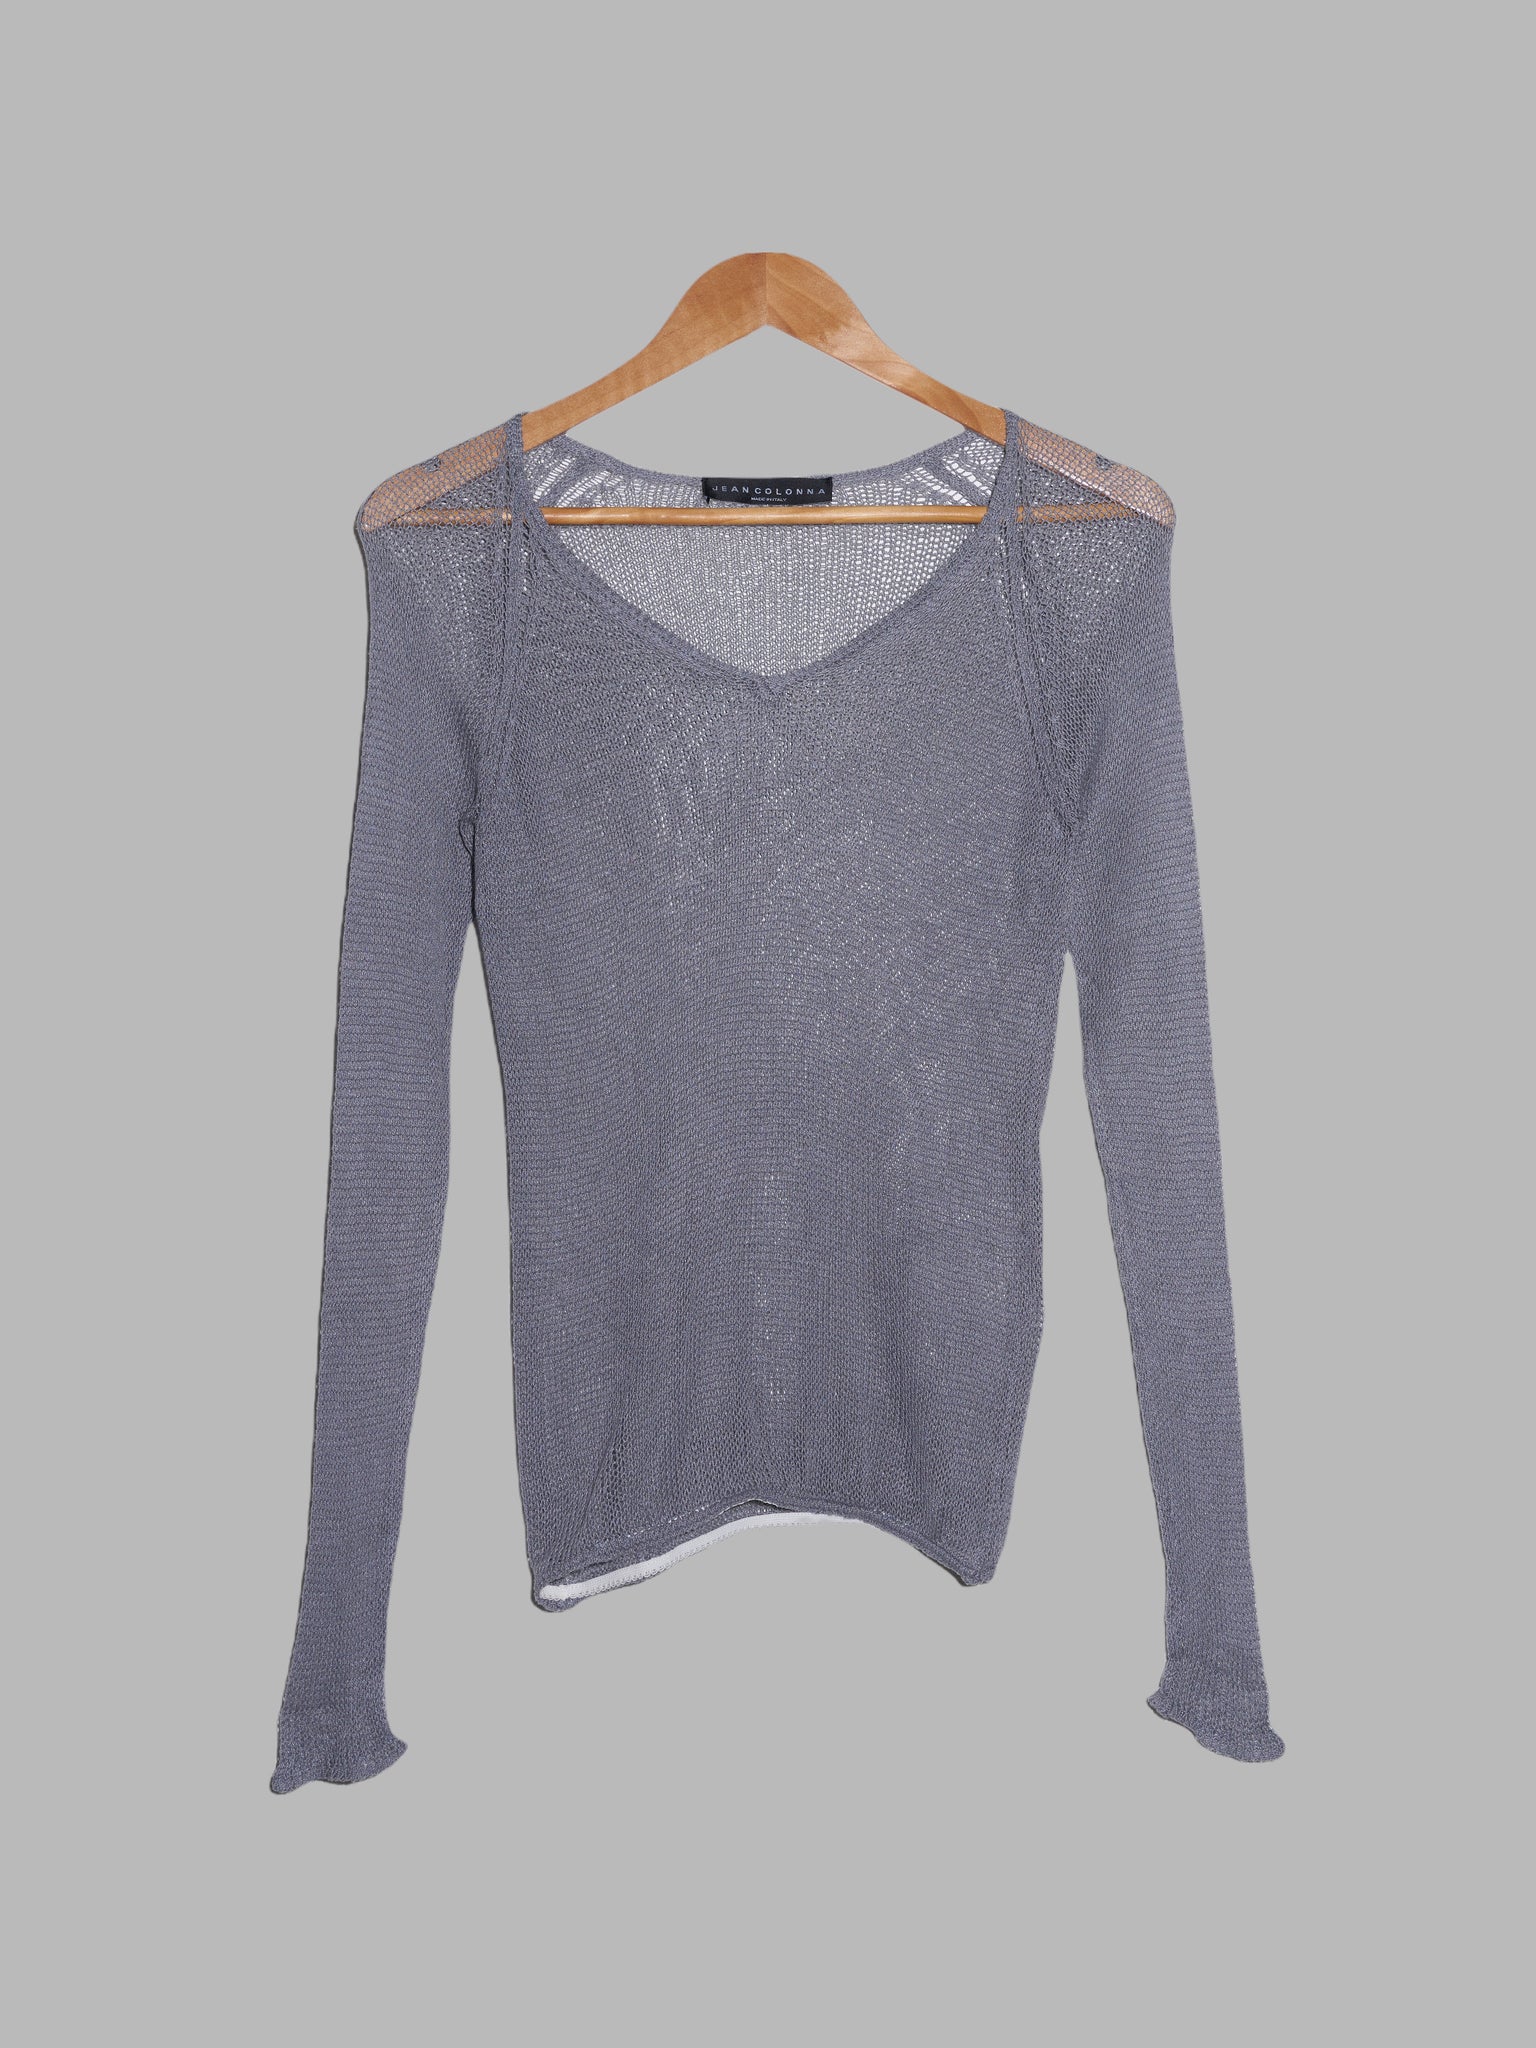 Jean Colonna AW1999 blue-grey silk loose knit long sleeve top - XS